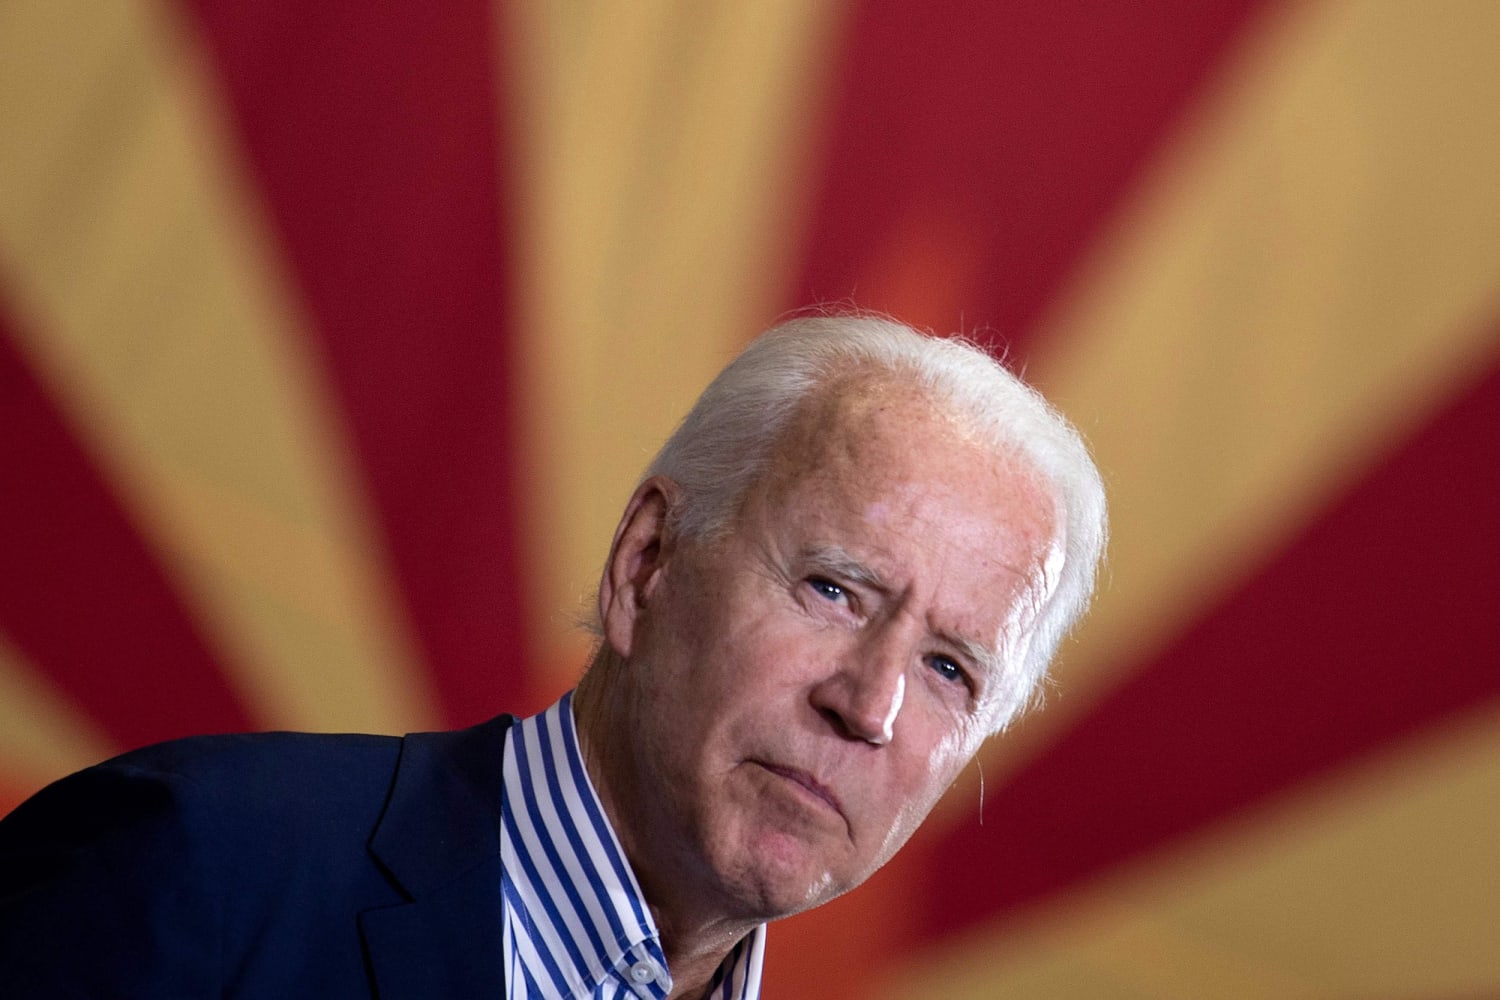 Biden S Win May Disappoint Trump Supporters But There Is Some Hope For Our Future